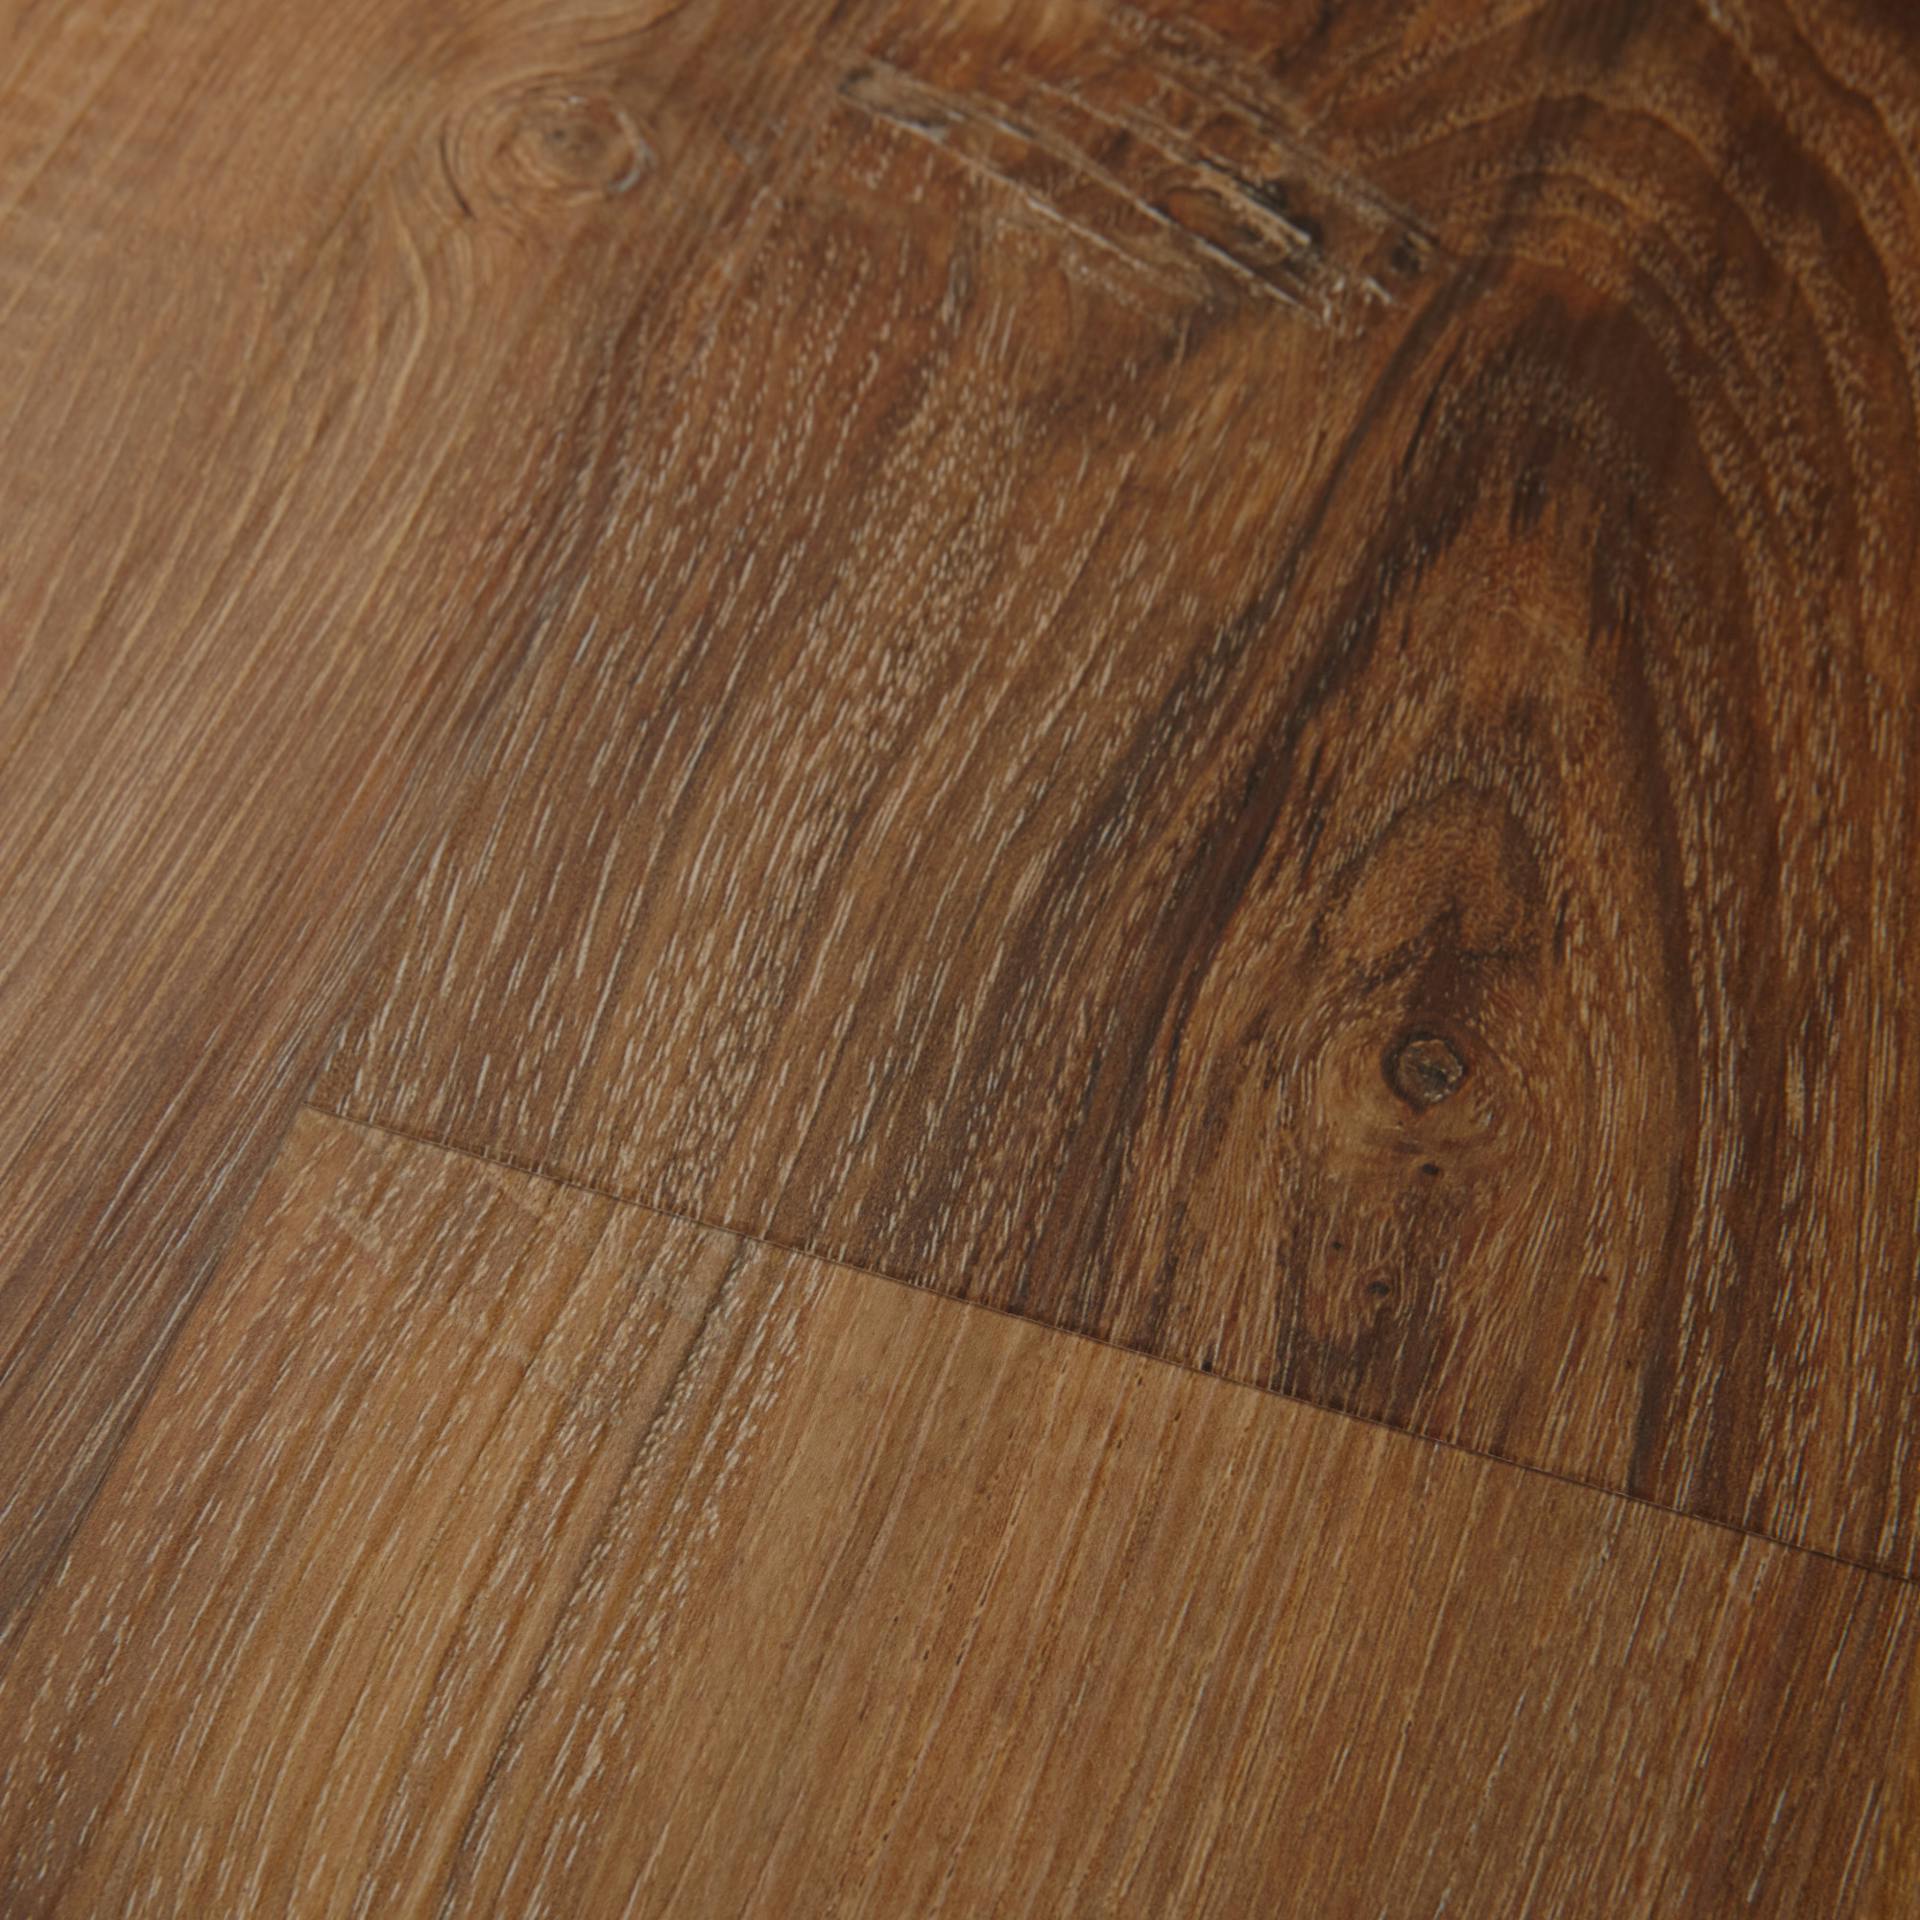 All About Tannin in Wood, Wood Blog